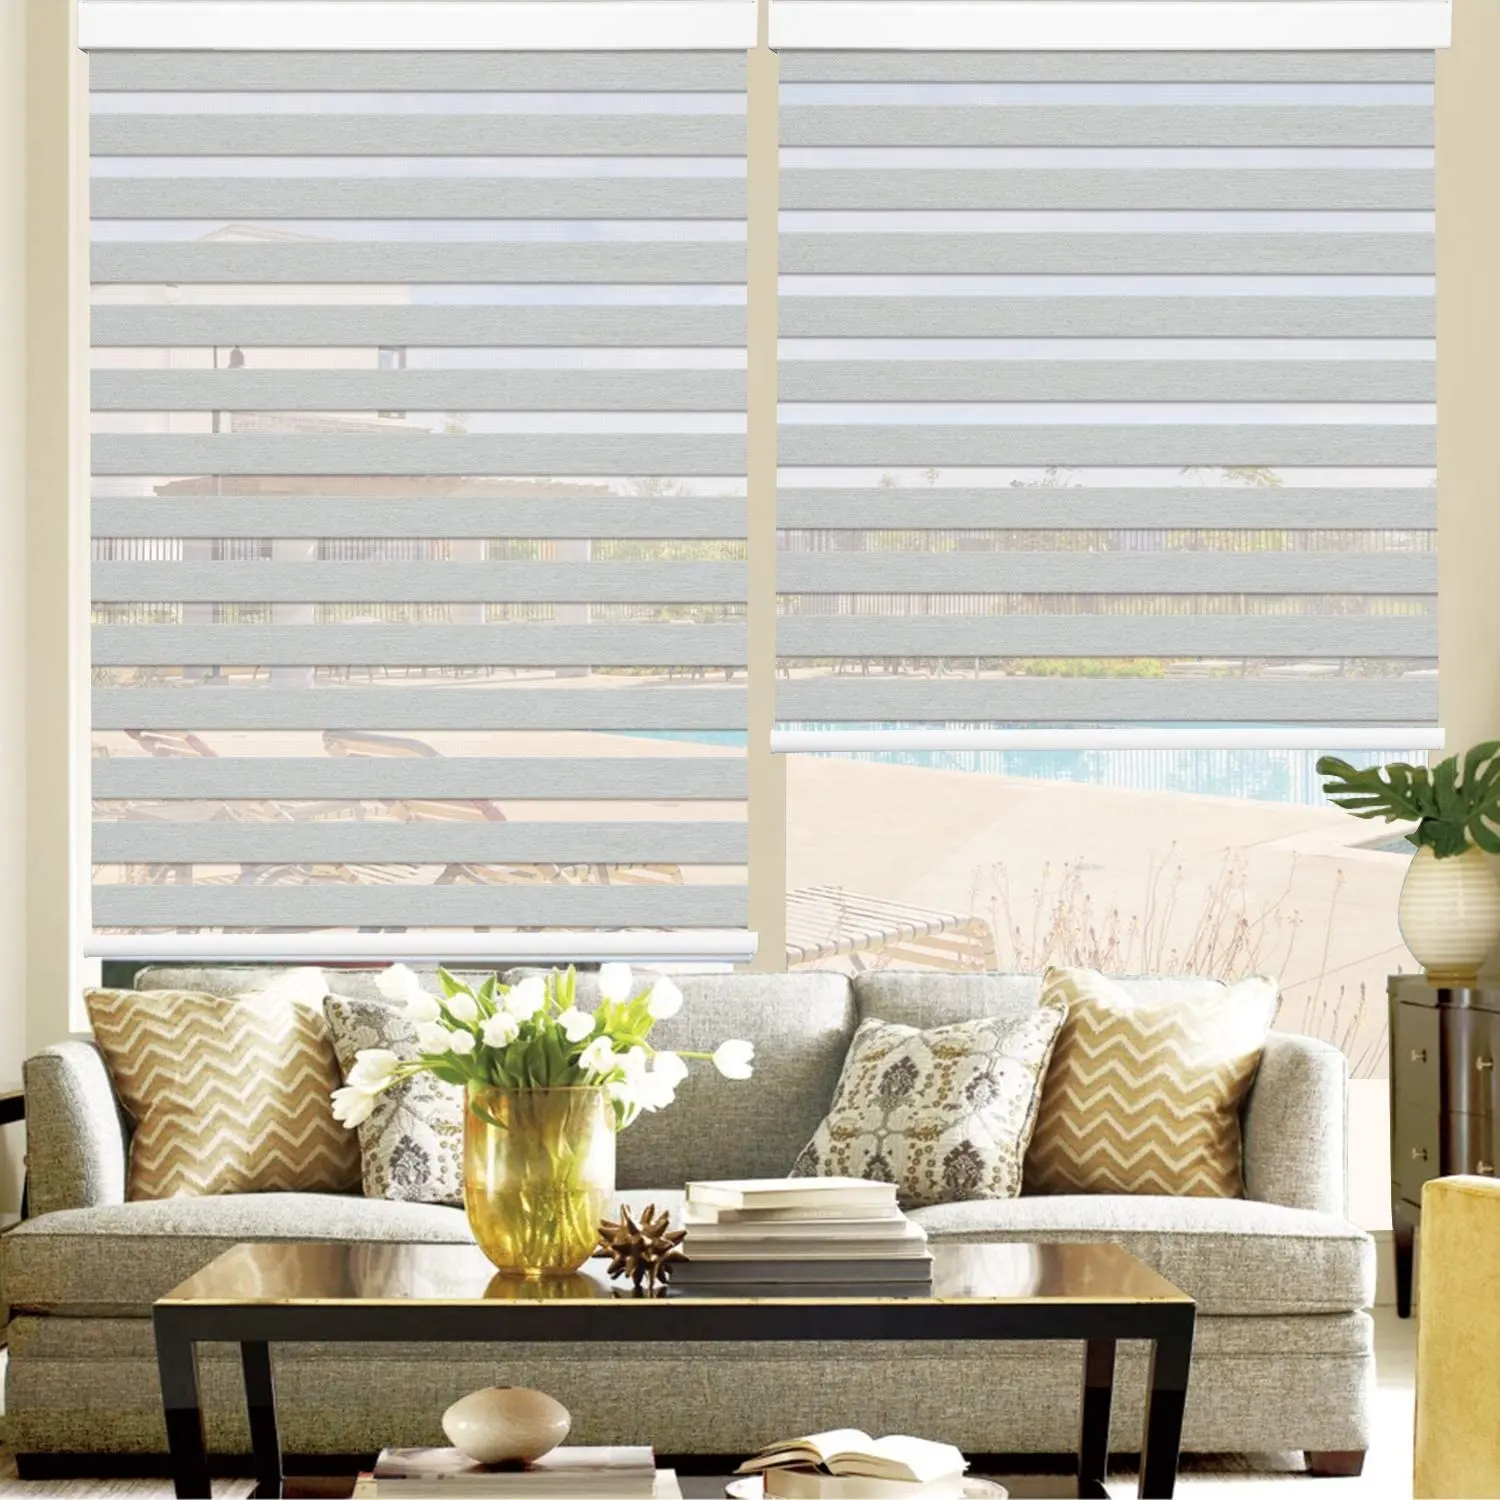 Easy Fix Low MOQ Zebra Blinds for Home Decoration Good quality Best Custom Zebra blinds for Various Situations